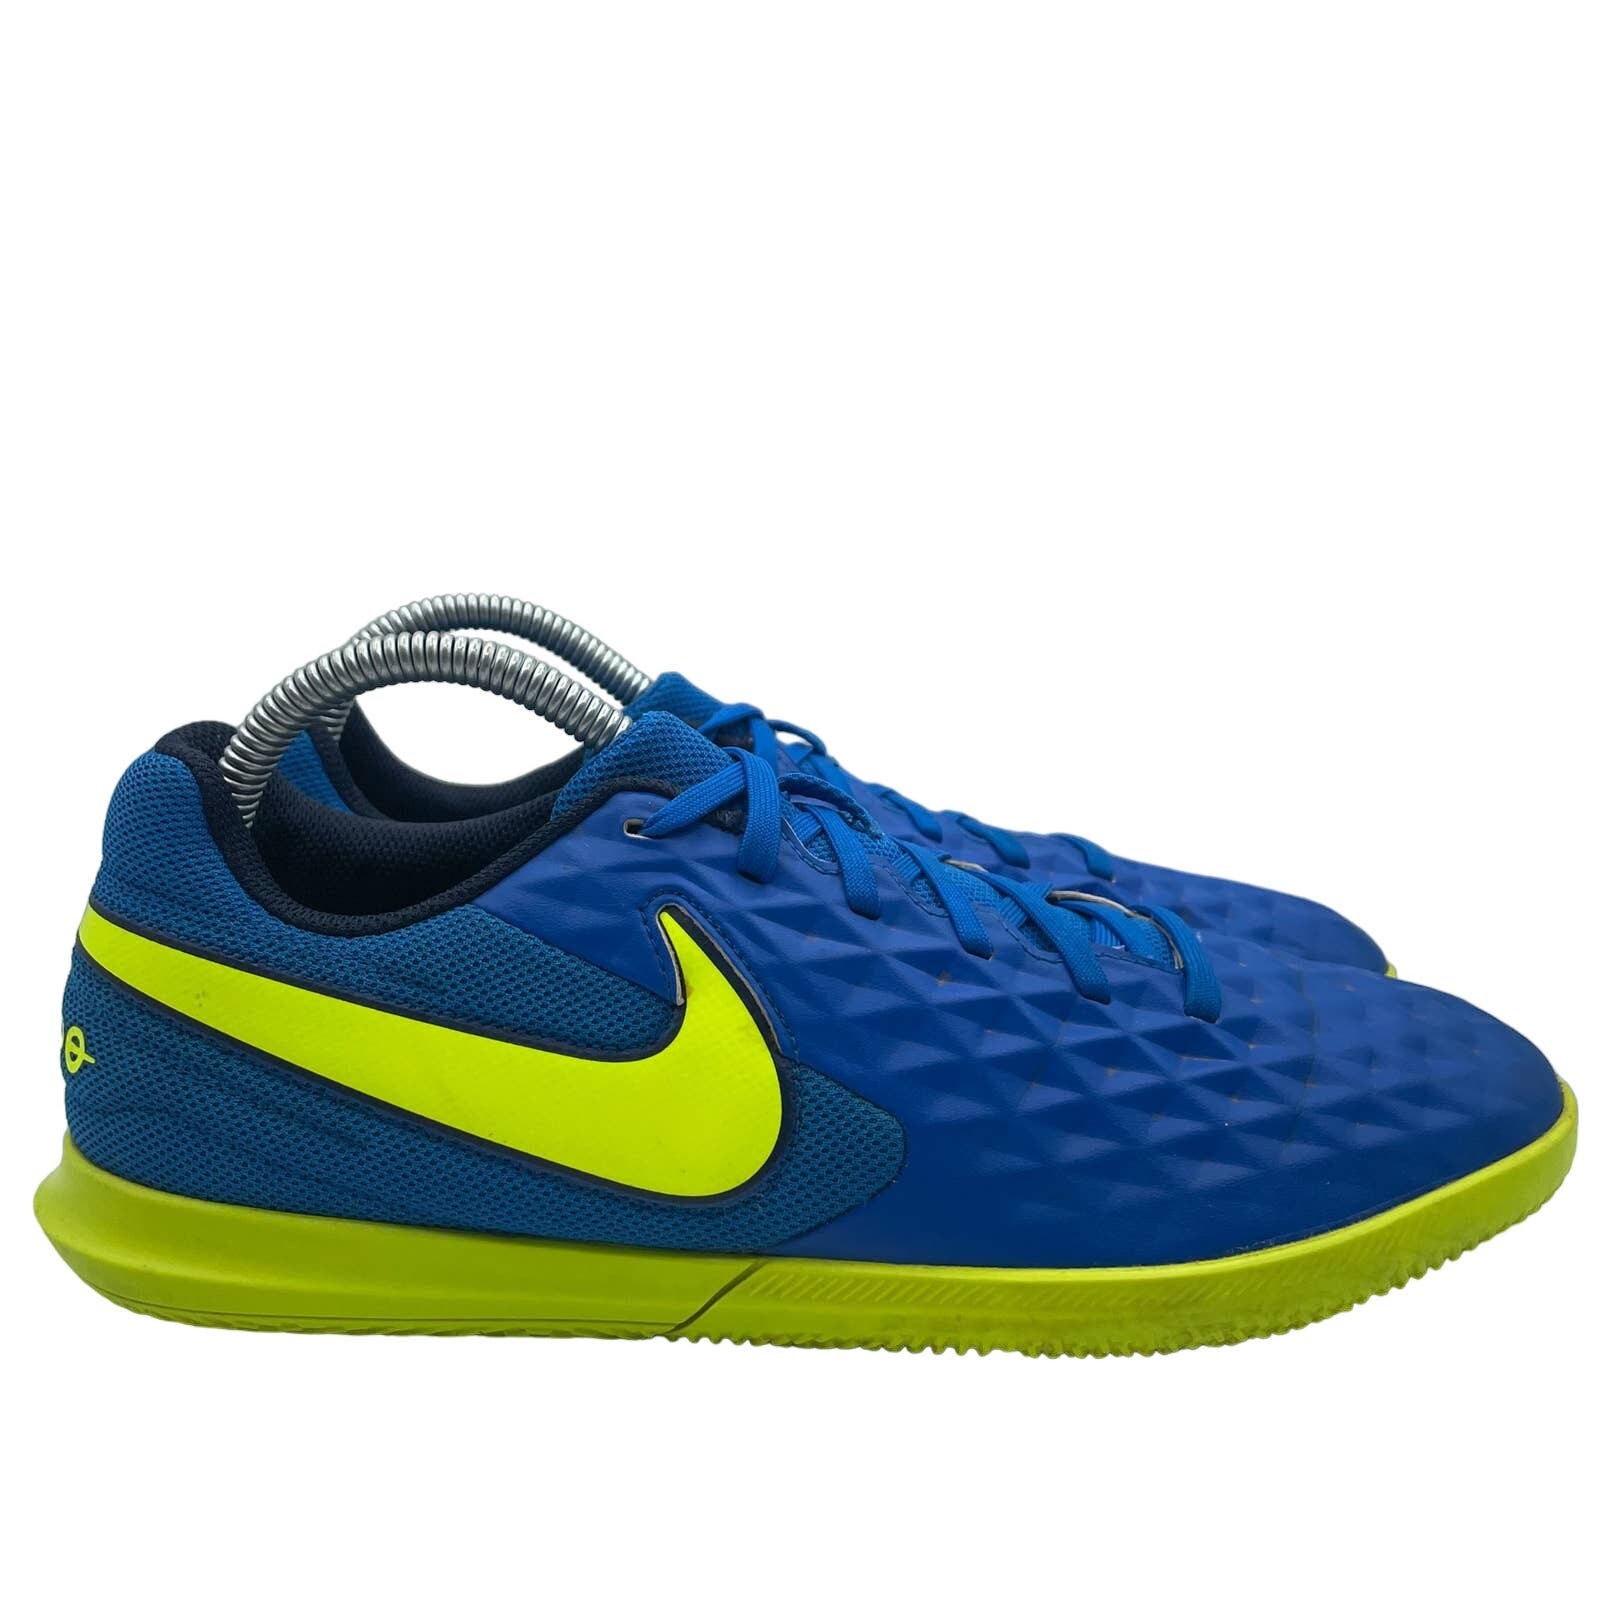 Primary image for Nike Tiempo Legend 8 Club IC Indoor Soccer Shoes Blue Green Mens 8